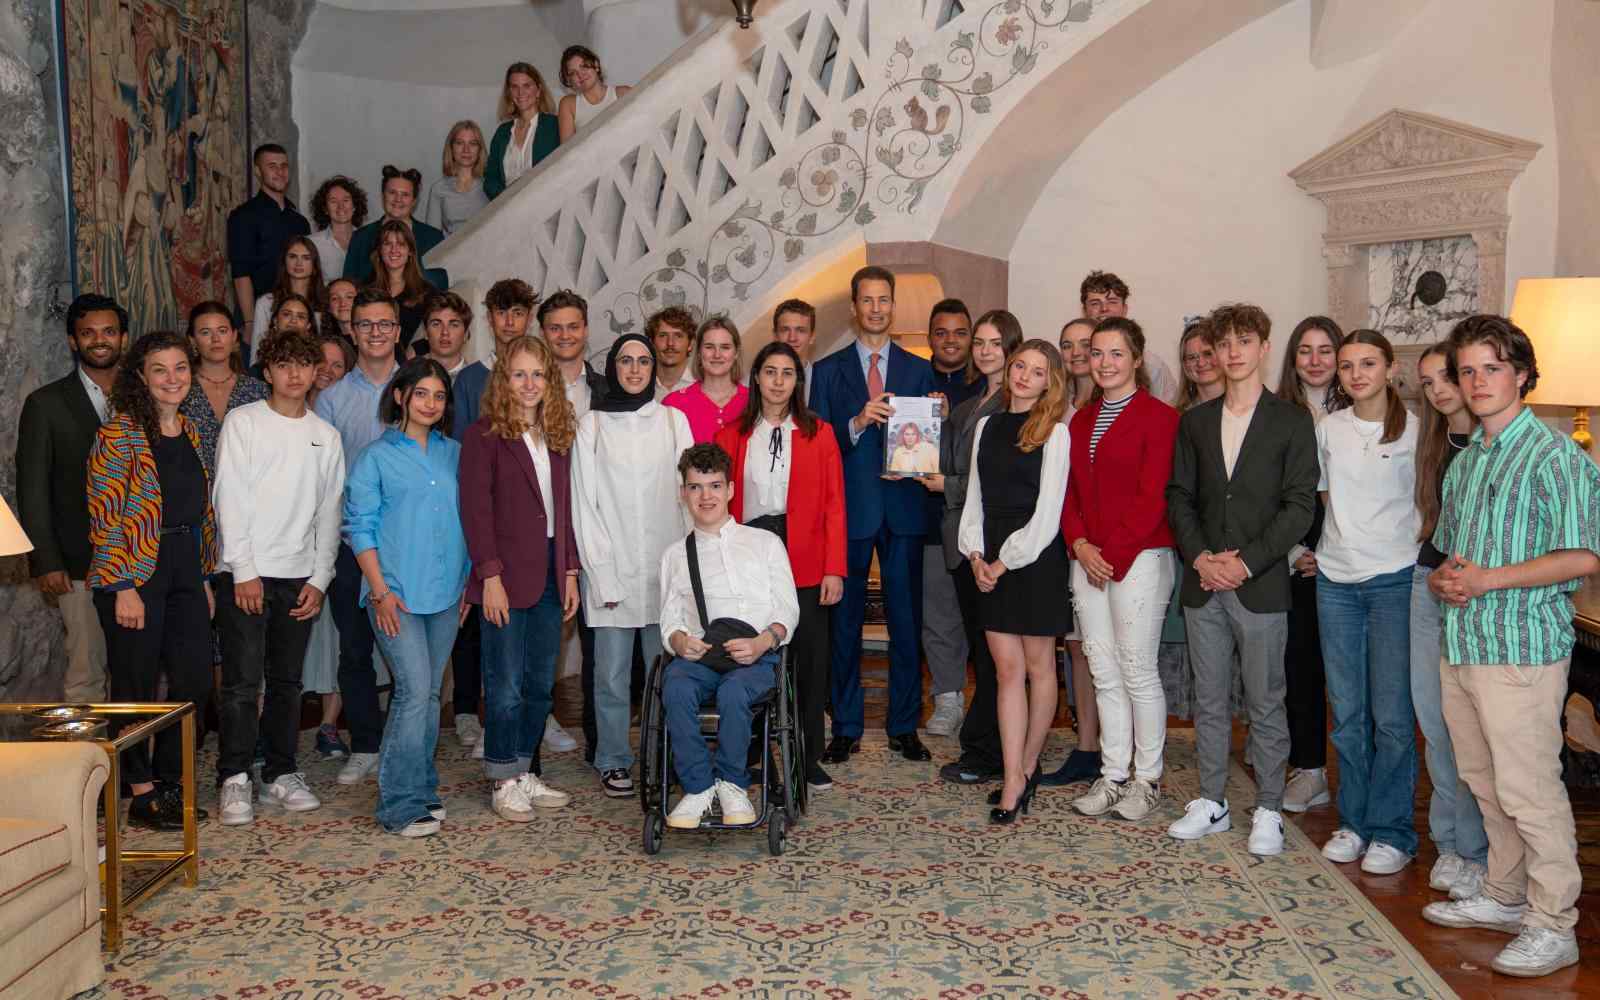 Group picture of the current cohort of the Generation Chanagemaker program with representatives from Liechntestein Royal Family